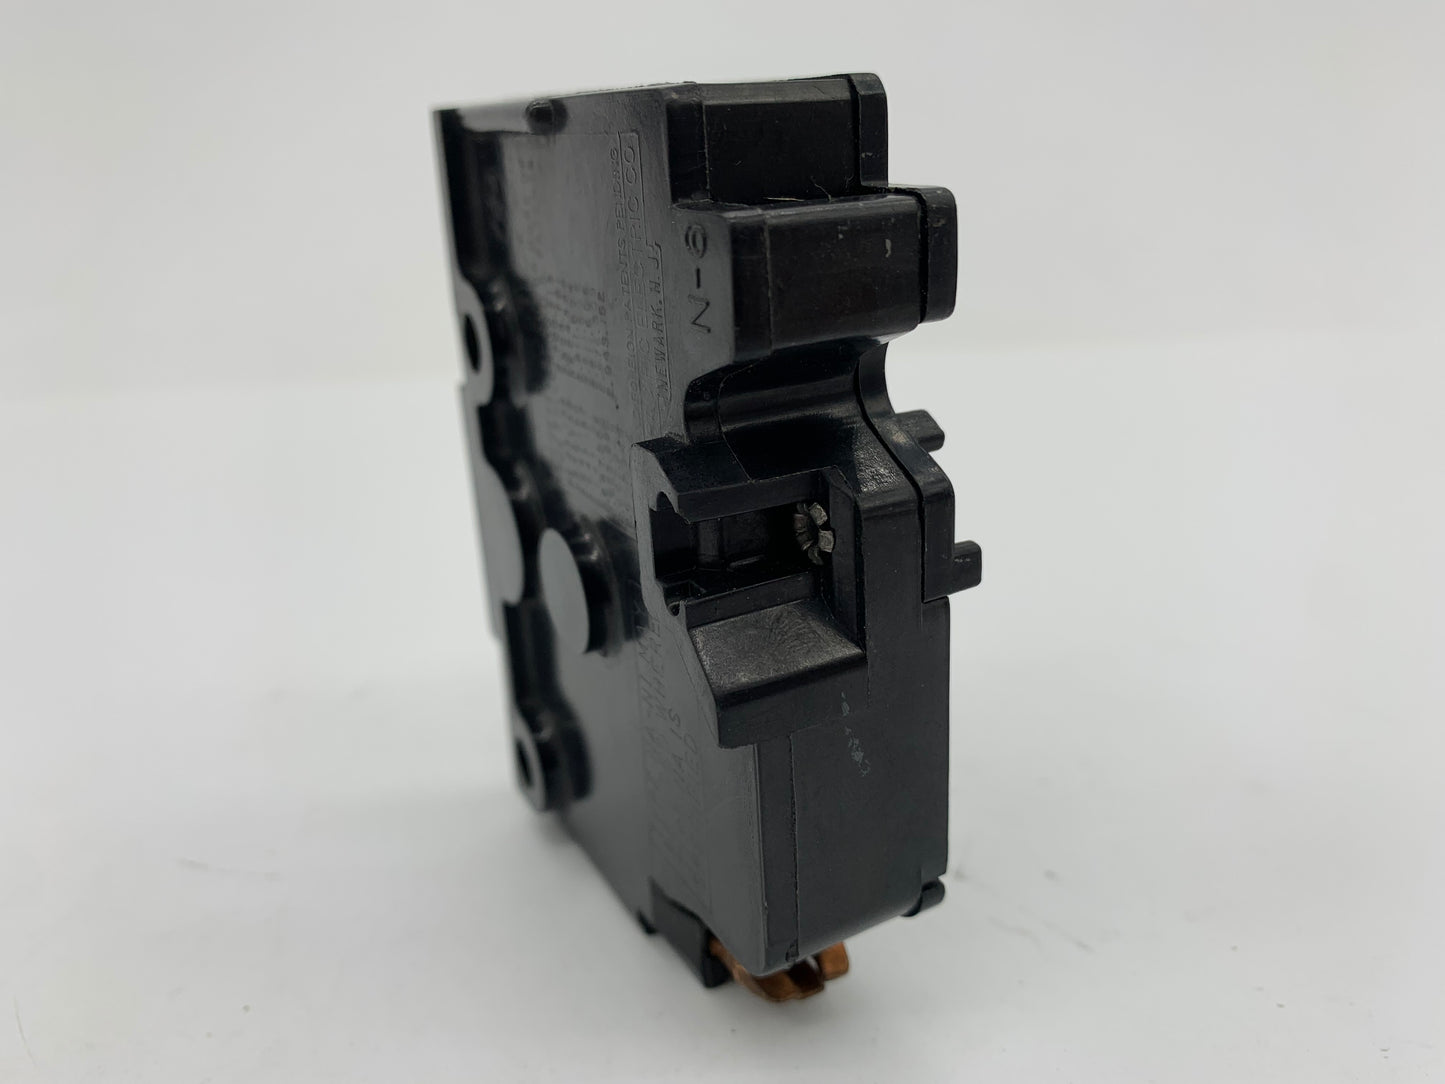 FEDERAL PACIFIC NA120 20A 1P STAB-LOK THICK SERIES CIRCUIT BREAKER - Reconditioned